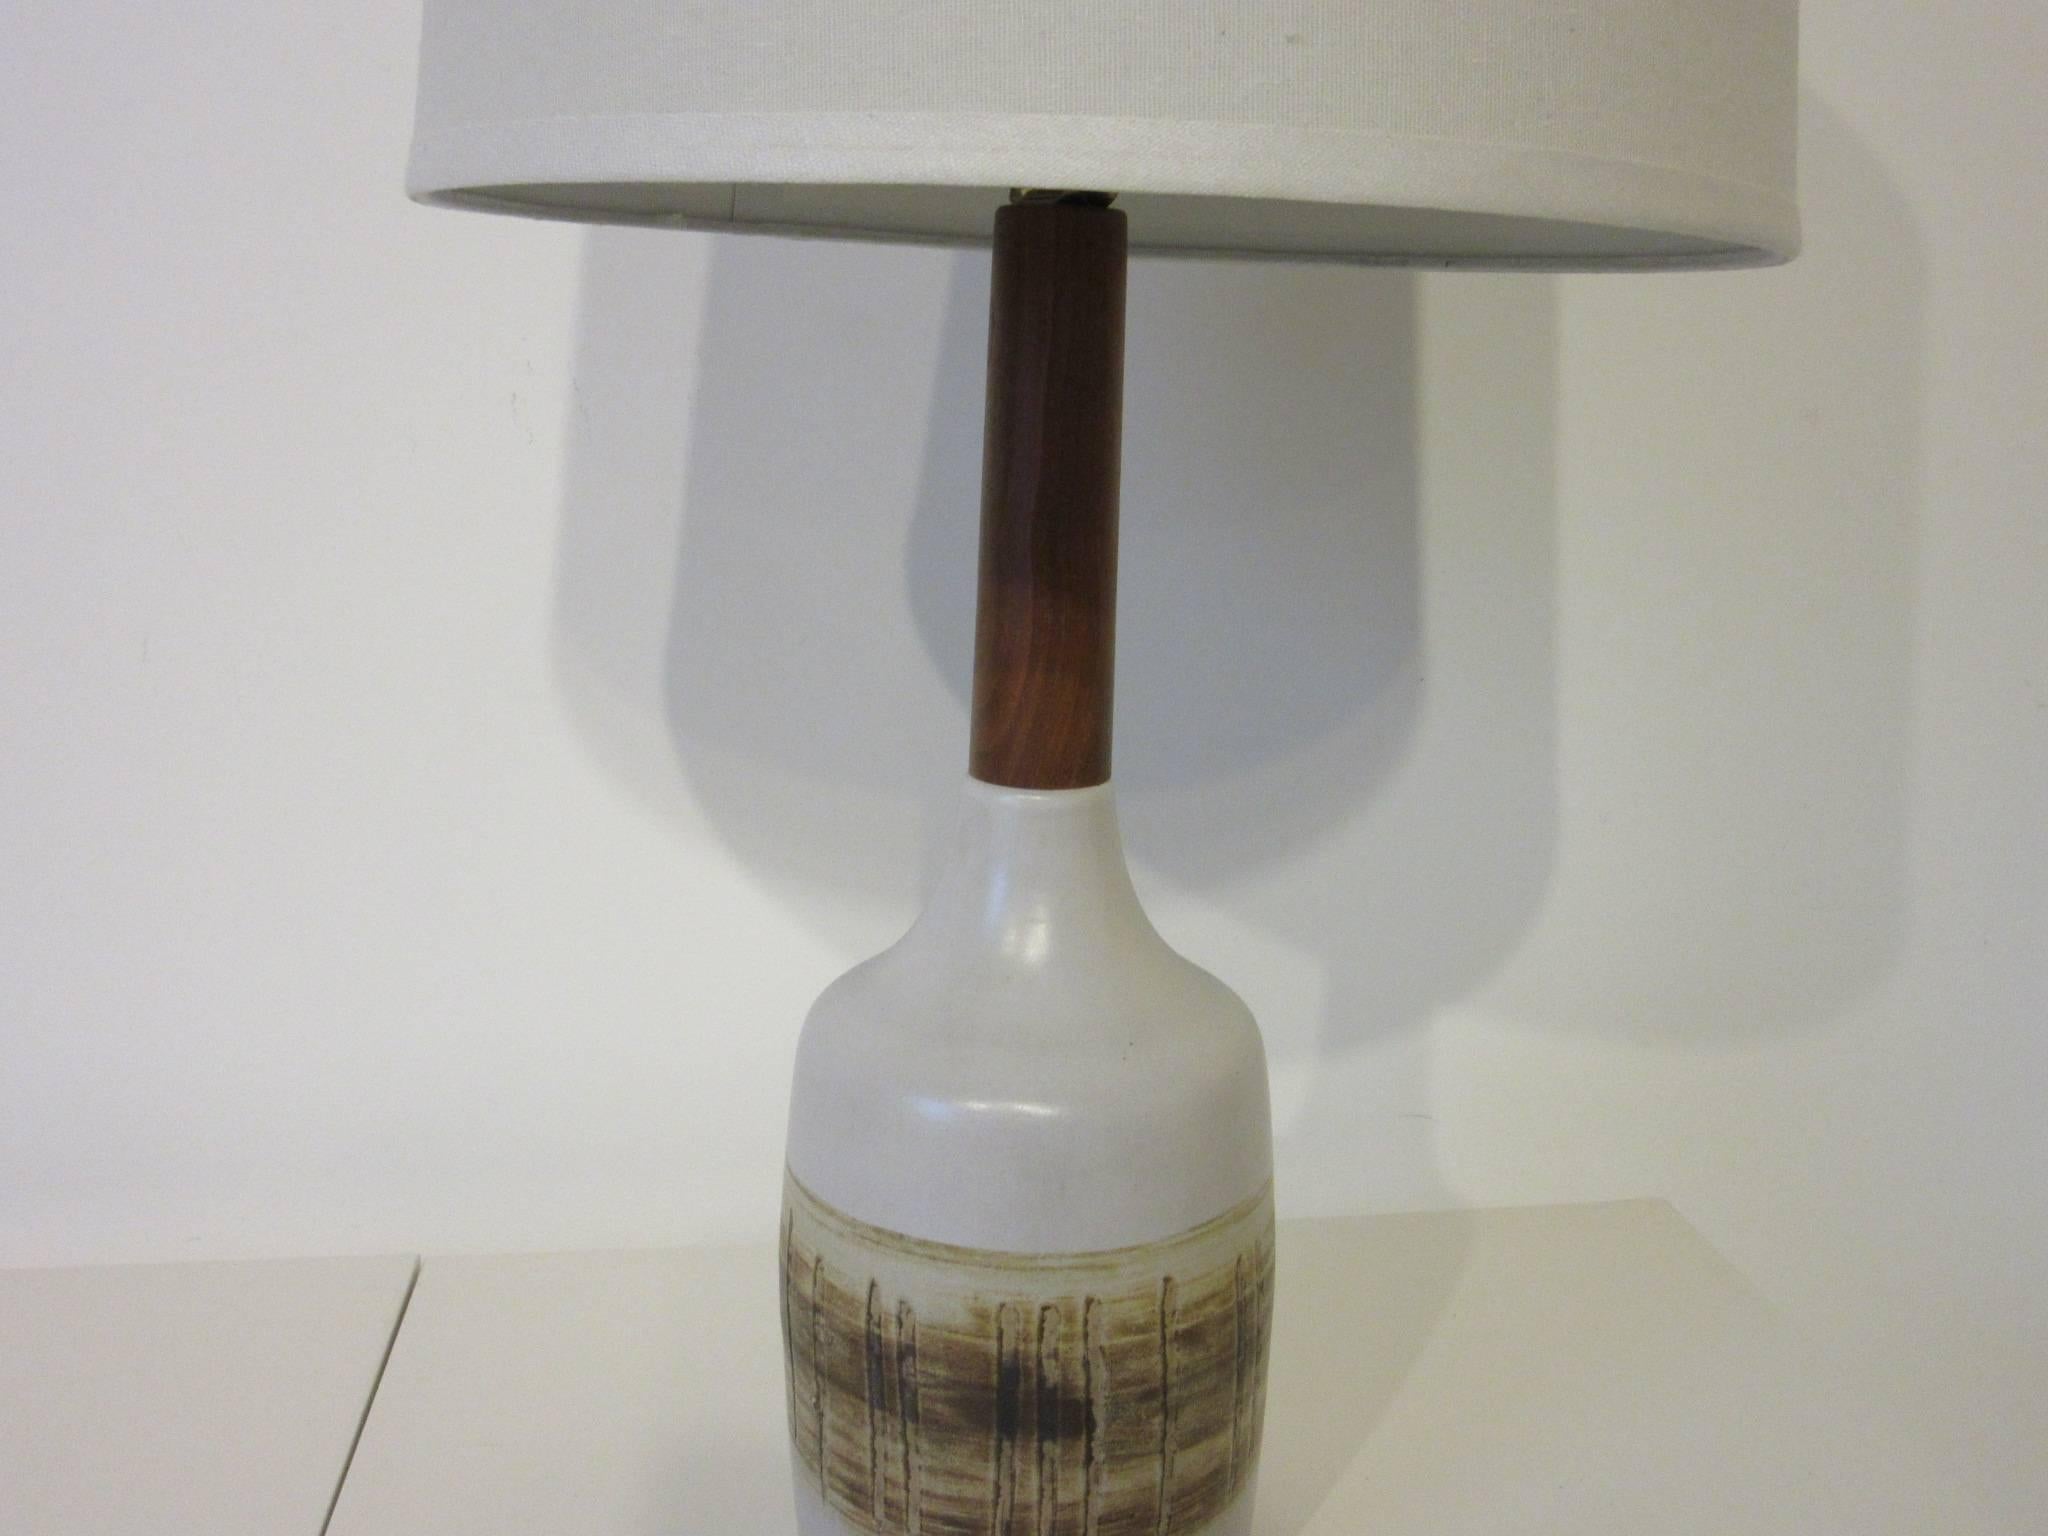 A pottery table lamp with incised and fired designs, teakwood stem and finial topped with a linen shade, artists signed to the lower reverse Martz , manufactured by Marshall Studios. This is the top choice for Mid-Century interiors.